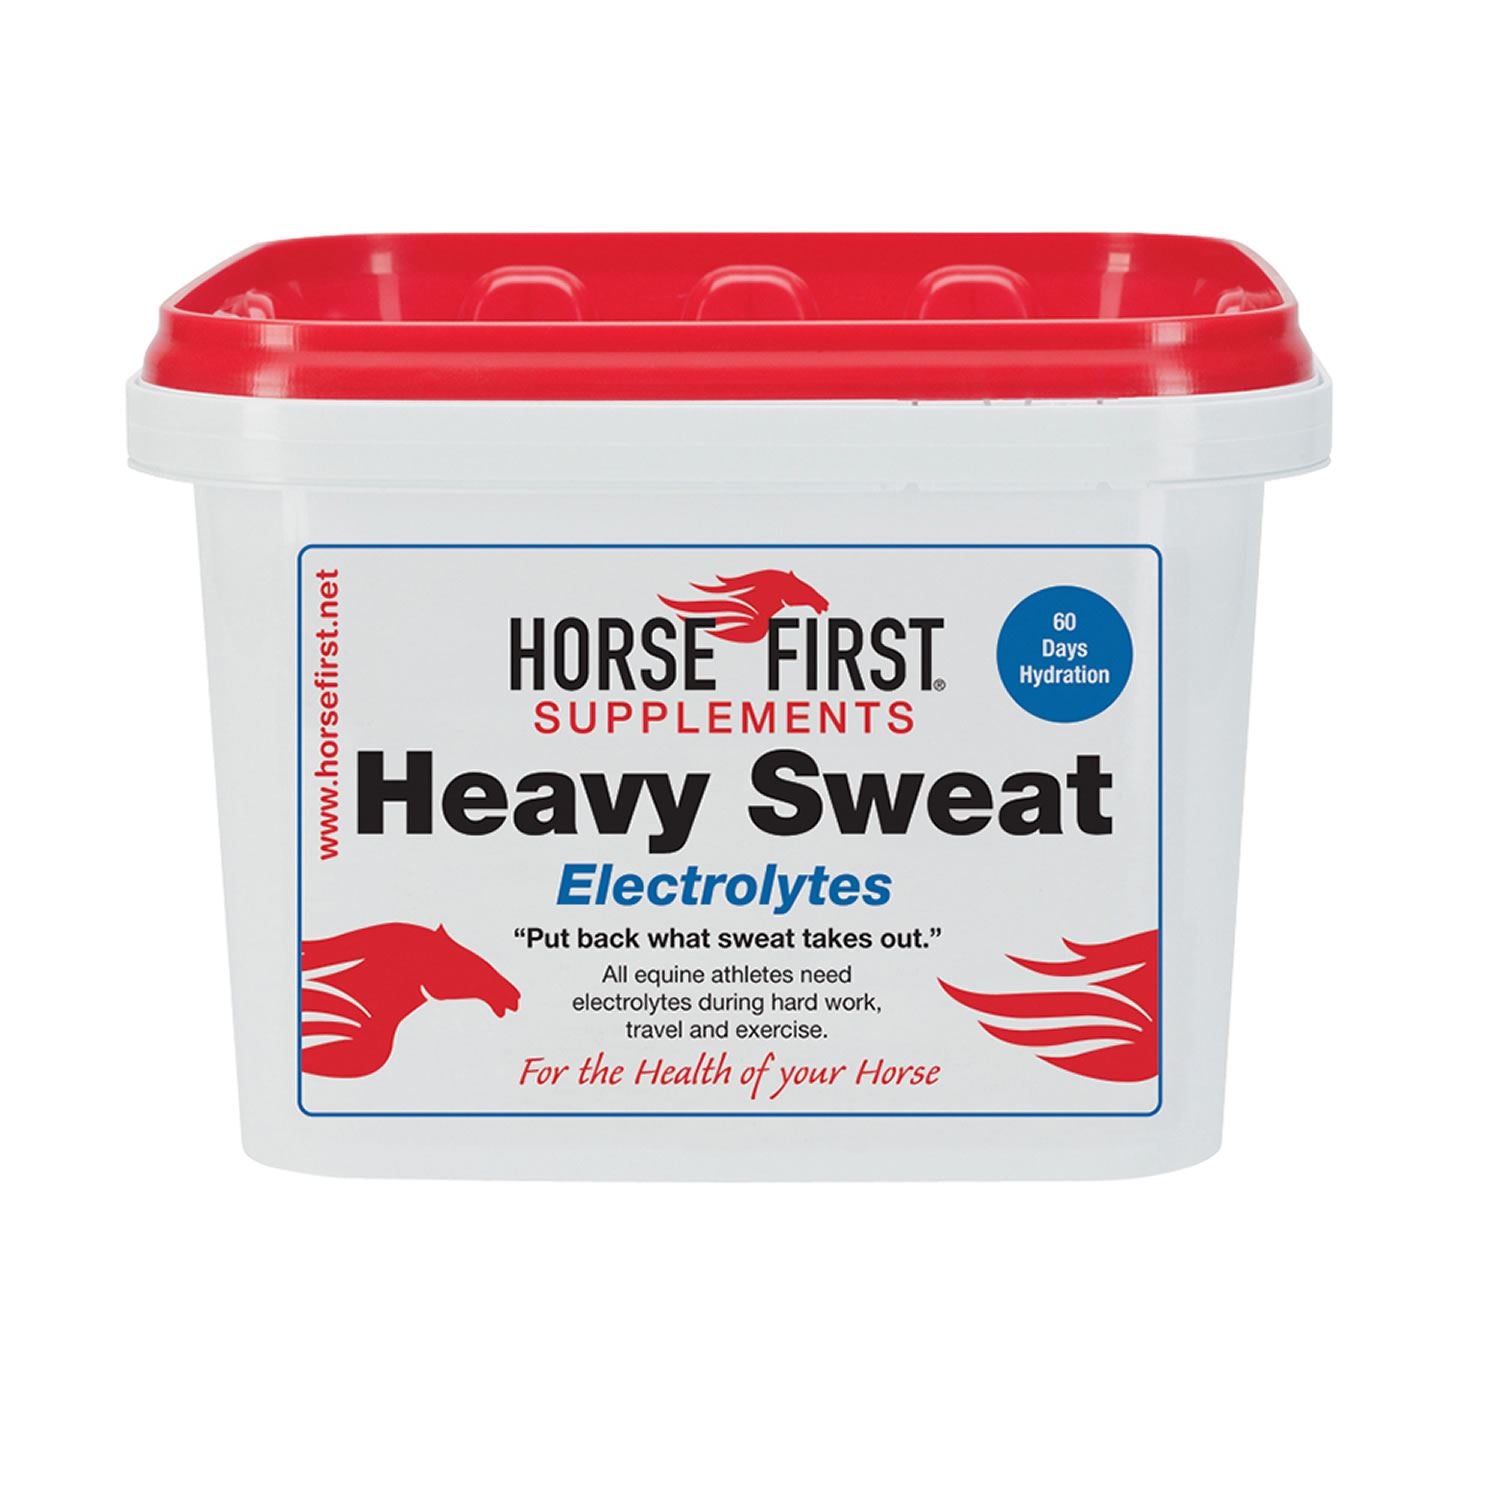 Horse First Heavy Sweat - Just Horse Riders